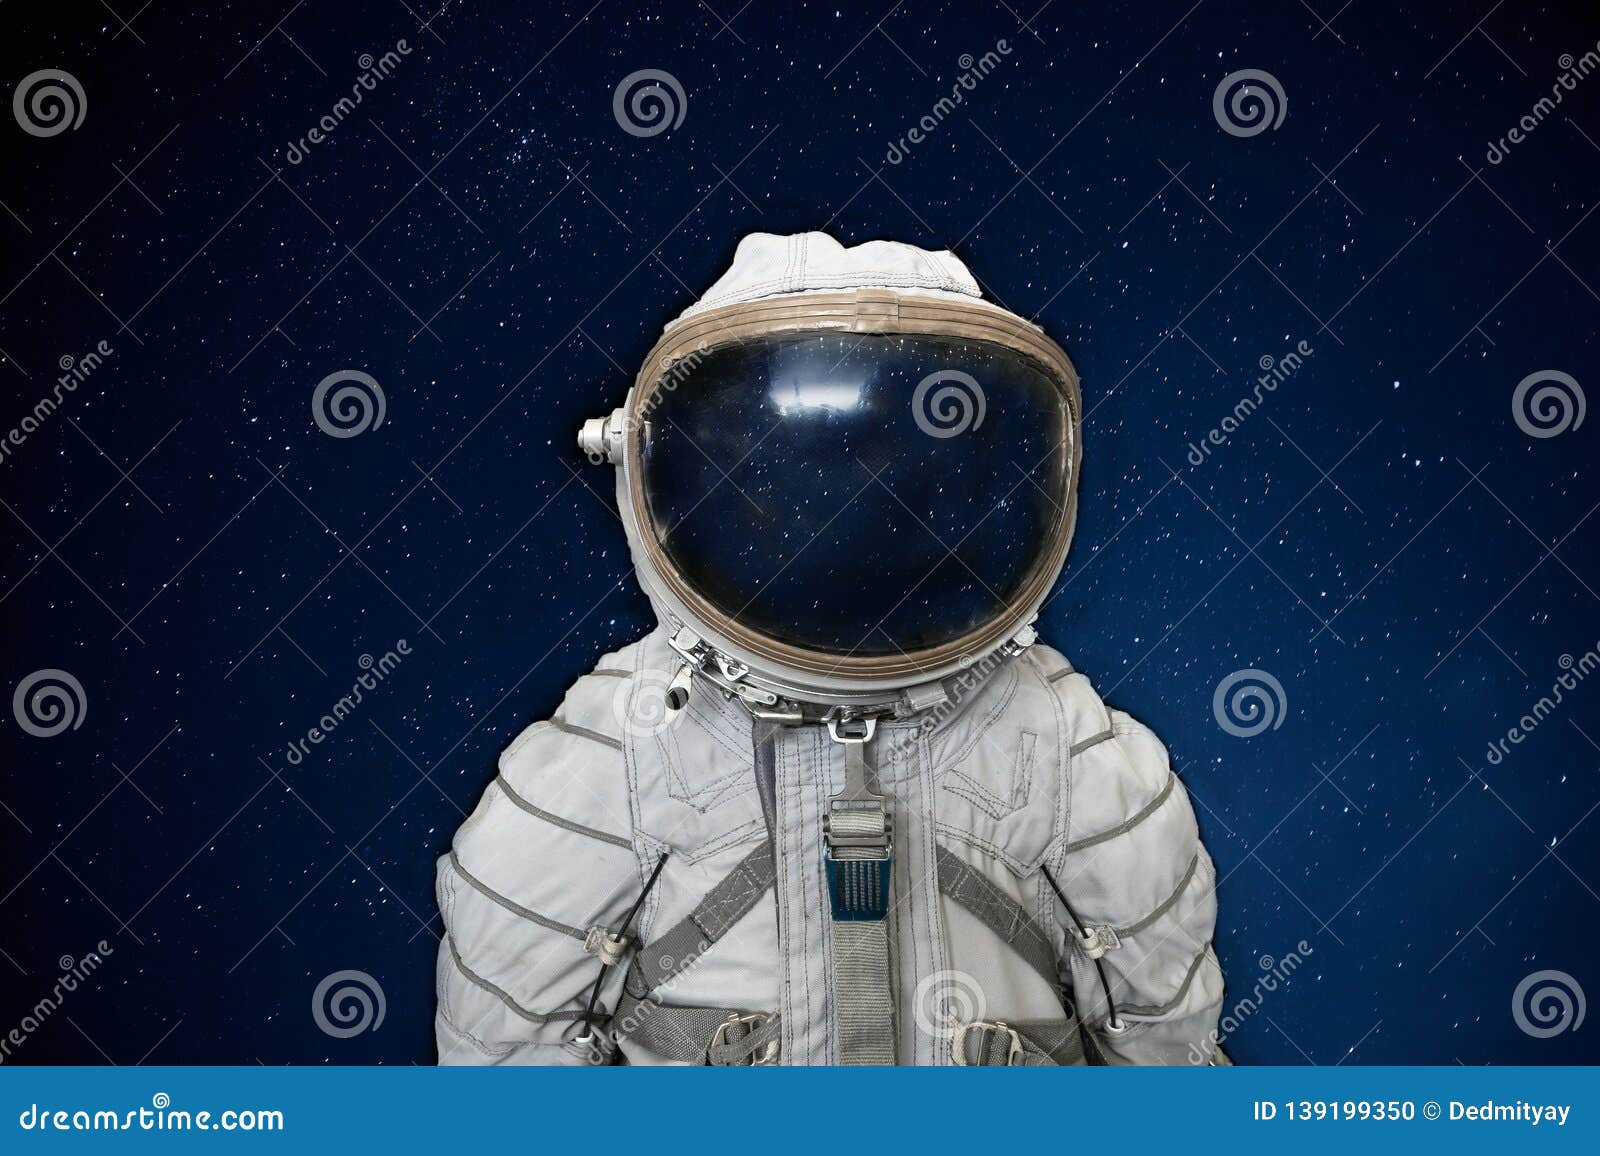 soviet cosmonaut or astronaut or spaceman suit and helmet on black space with stars background